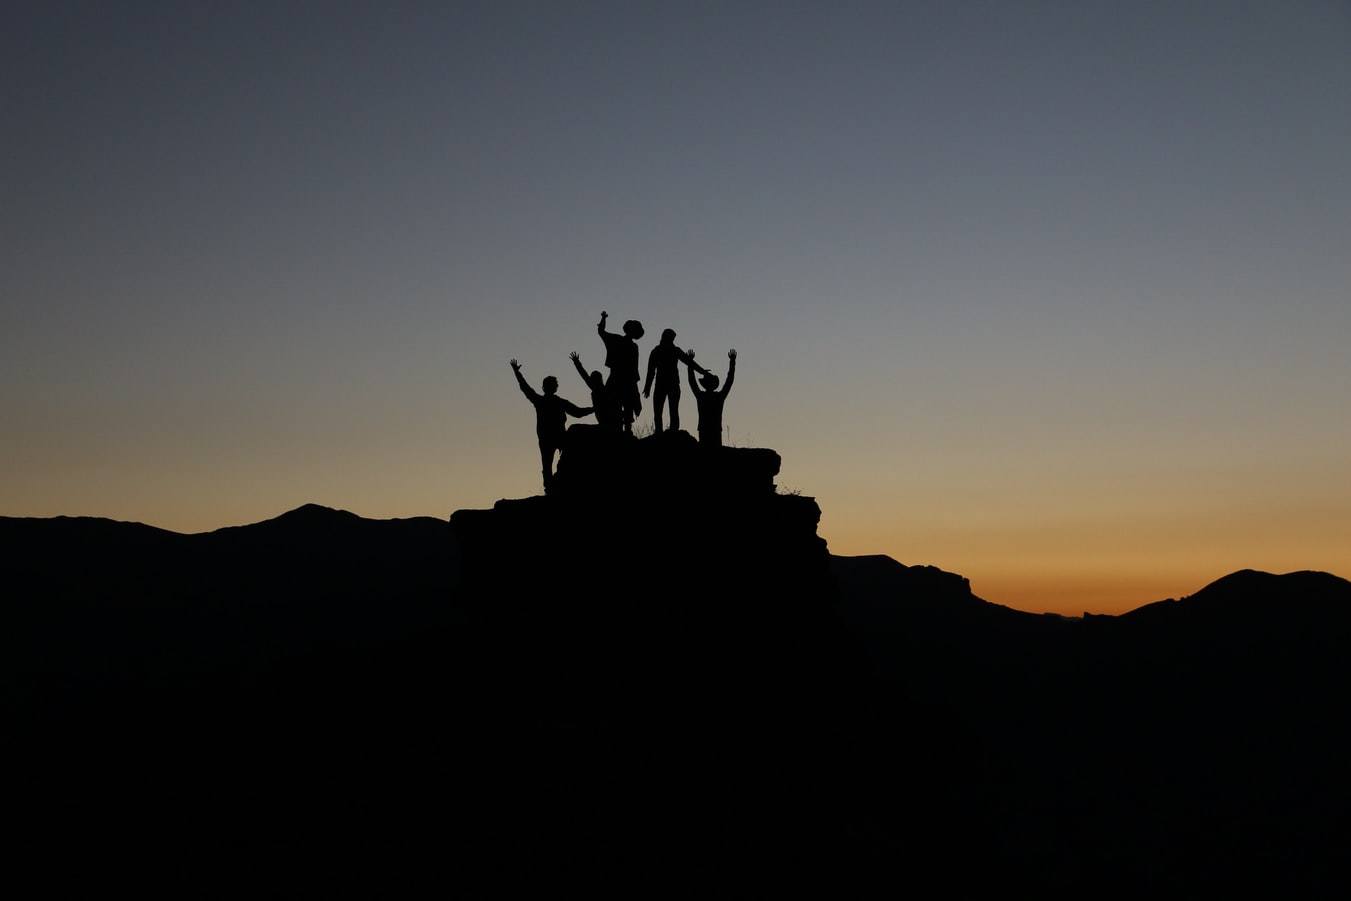 Group of adults standing on top of a rock together